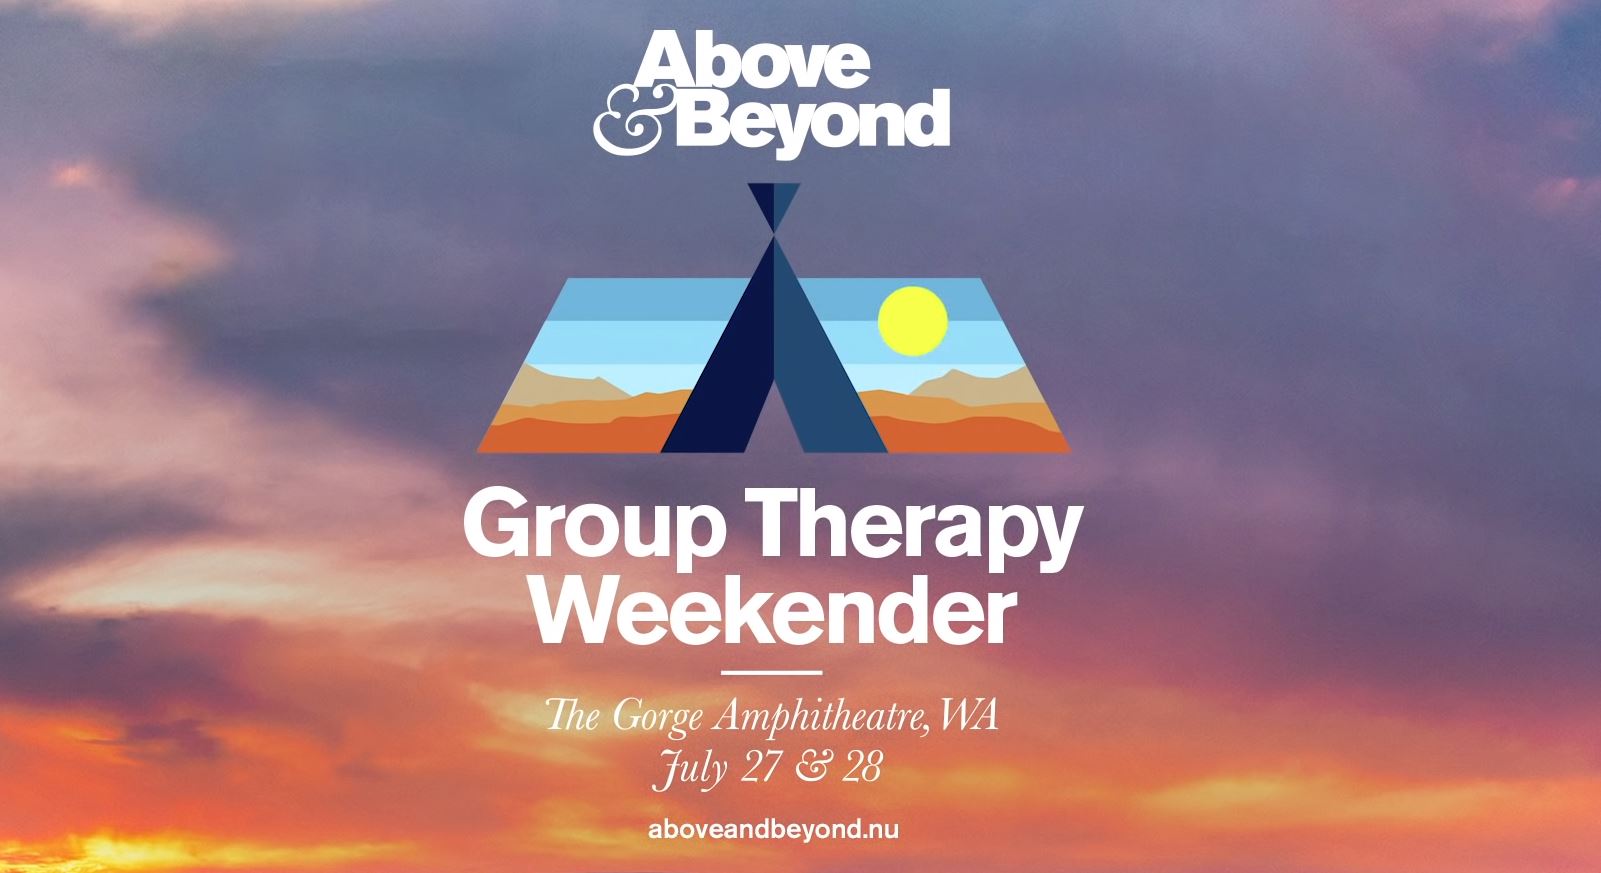 Above and Beyond Group Therapy weekender